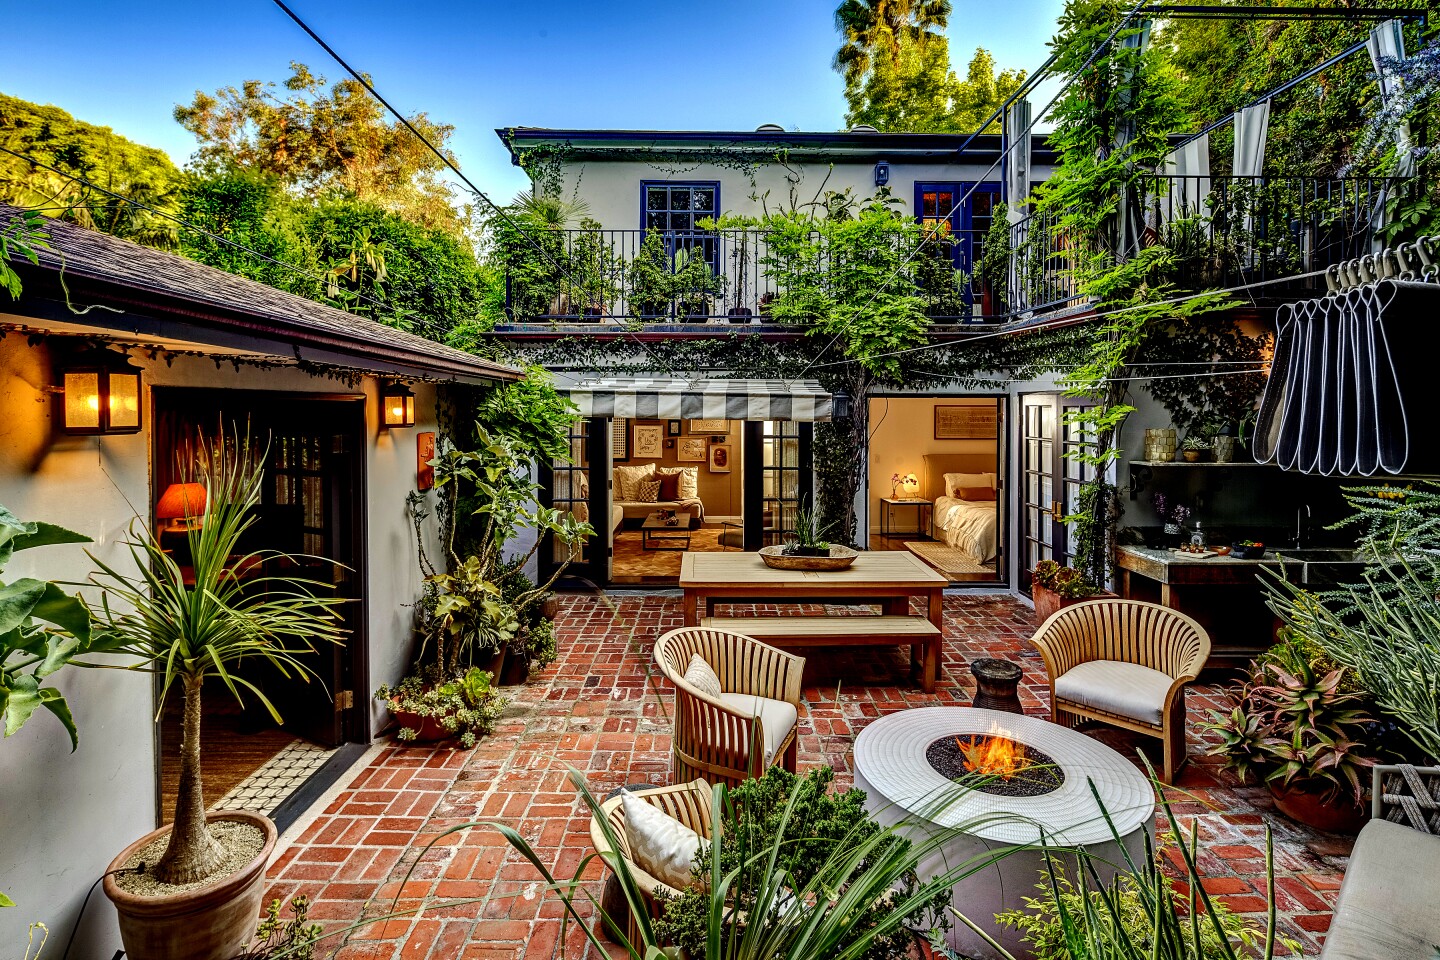 Time spent living in Mexico City was a driving force behind the renovation of this 1930s traditional home in West Hollywood. The home's lush backyard was designed as a series of small outdoor rooms and features intimate sitting areas, a small outdoor kitchen and an outdoor audio system for entertaining. Terra cotta planters and clay pottery crafted by Mexican artists dot the backyard. Upstairs, the master suite opens to a private garden balcony. Inside, the home, priced at $2.299 million, has hardwood floors, a living room with a fireplace and an updated kitchen.